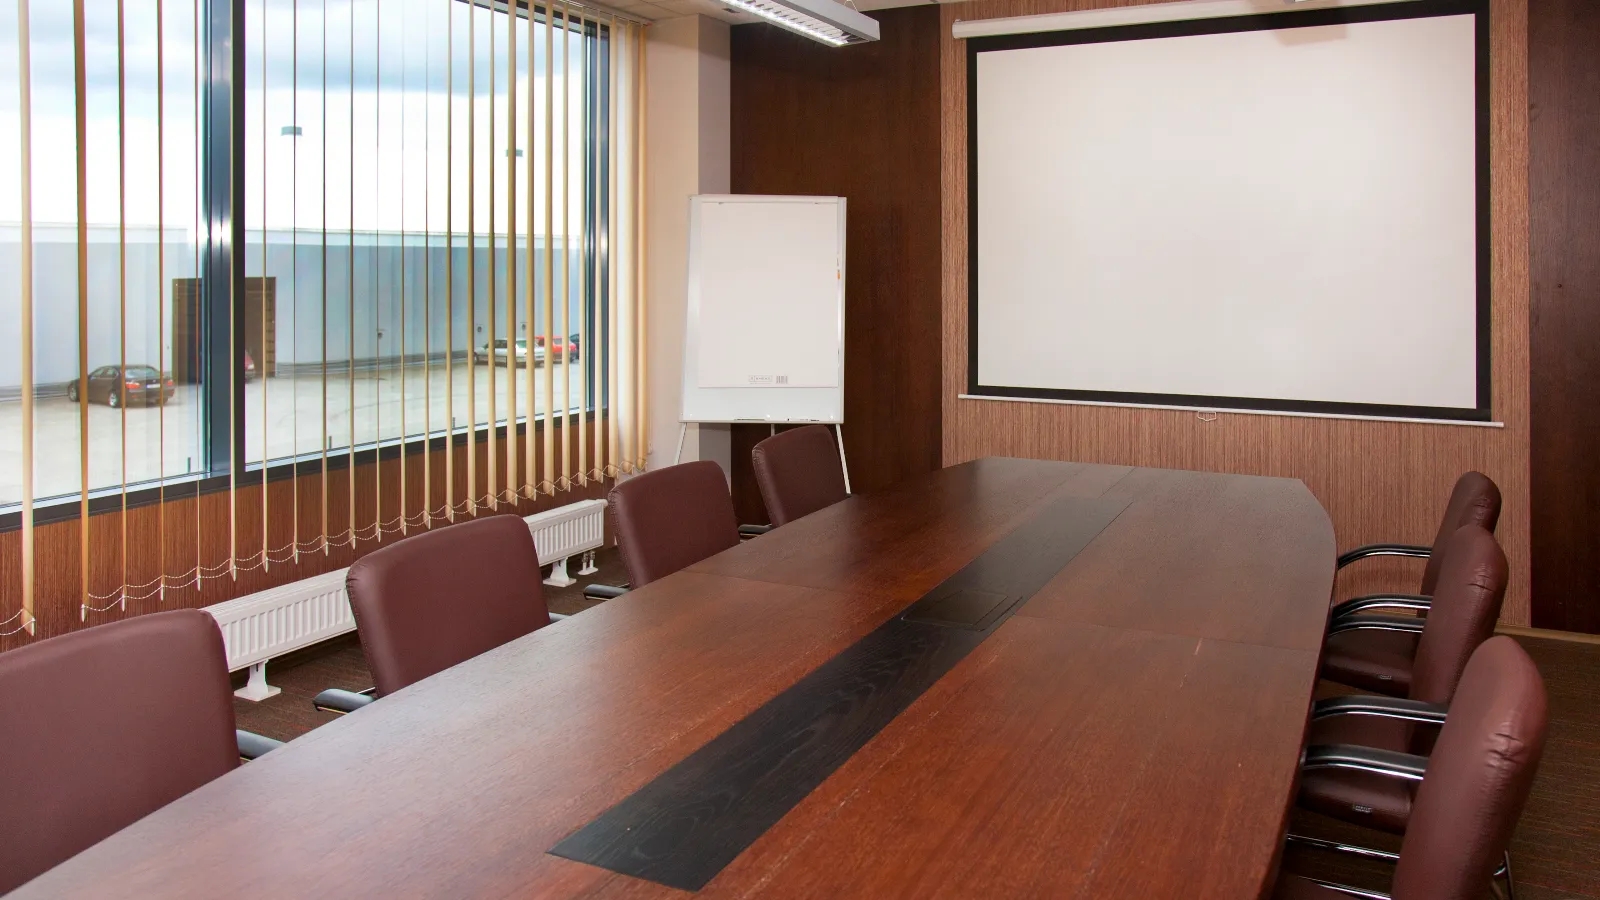 empty conference room